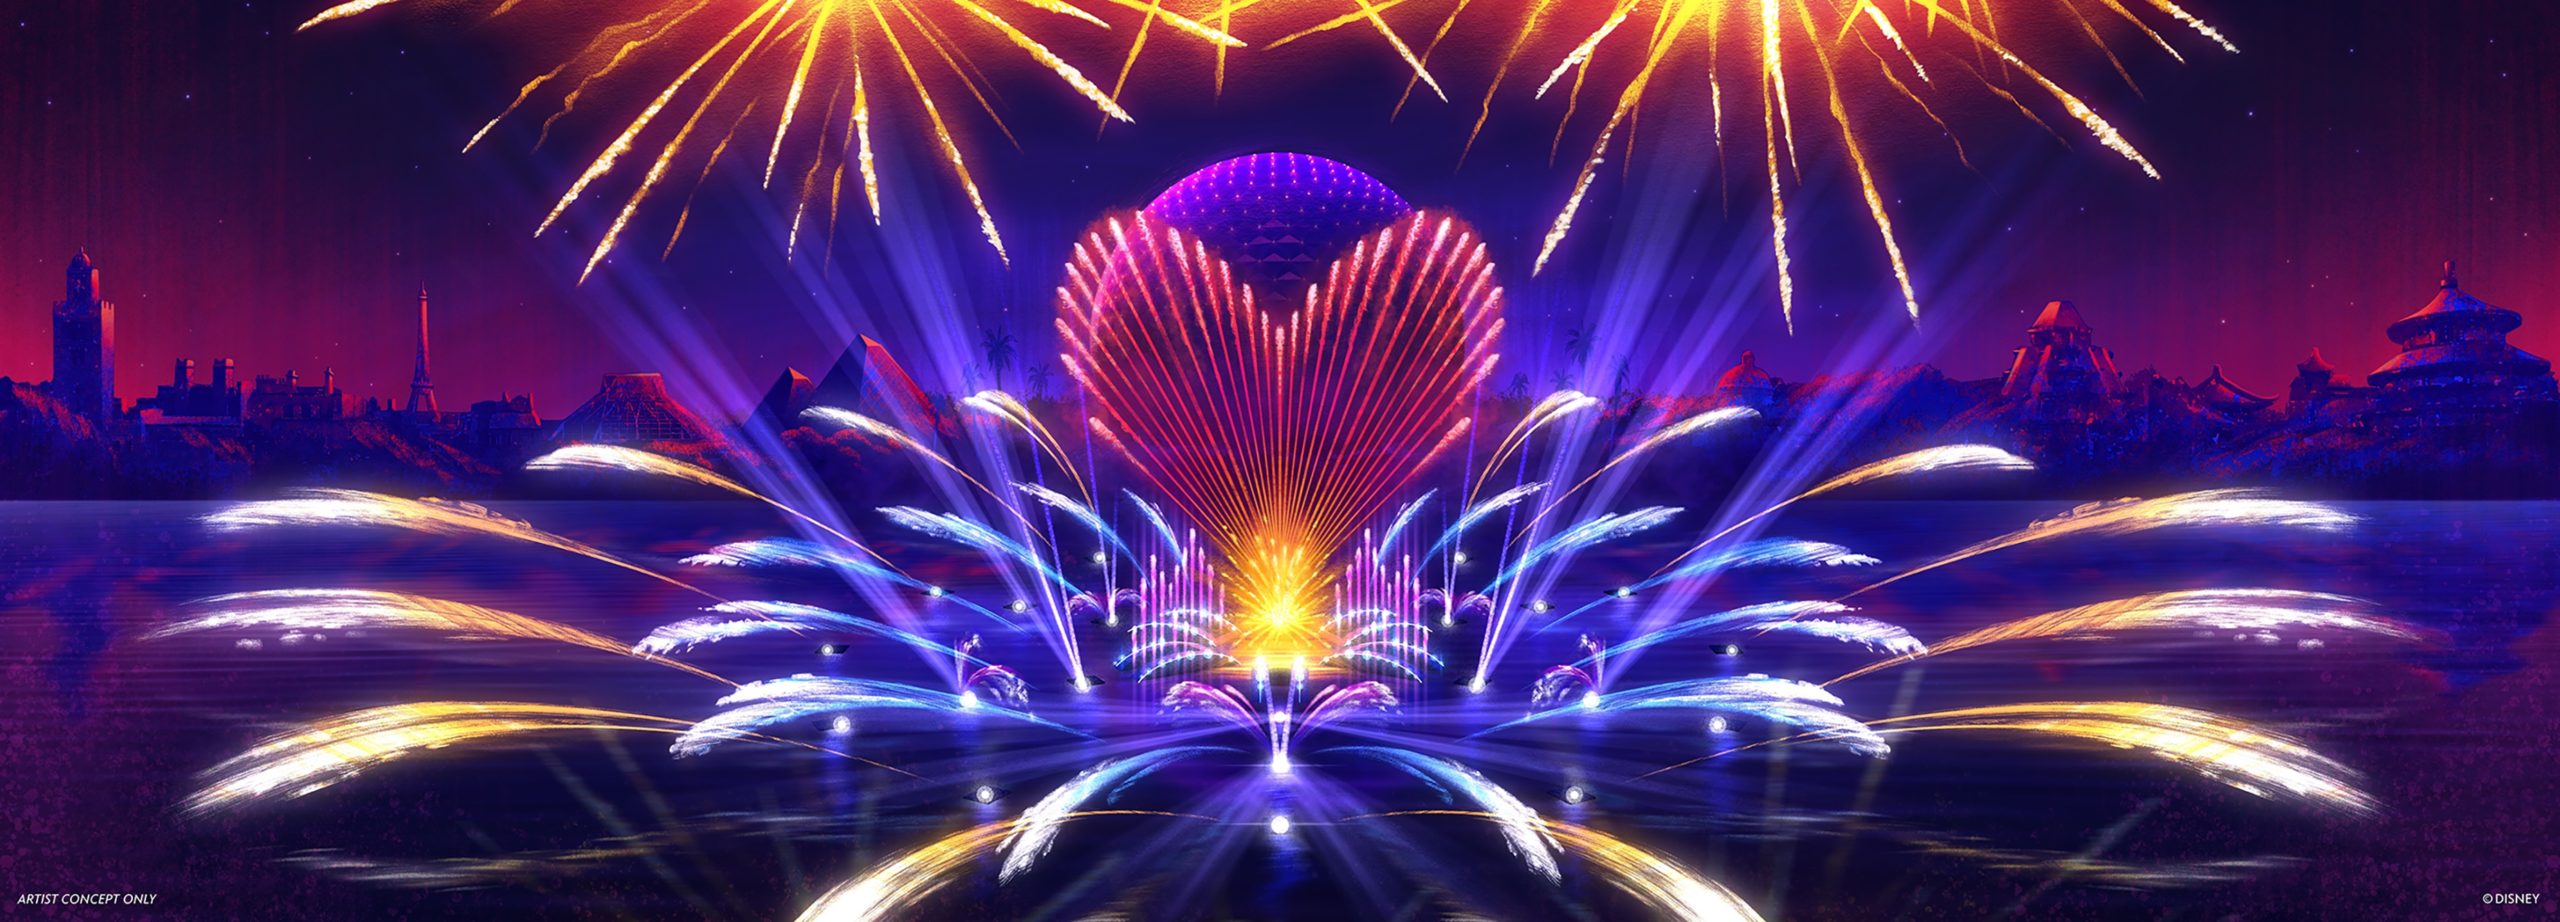 FIRST LOOK: Epcot Nighttime Disney100 Show Concept Art Revealed